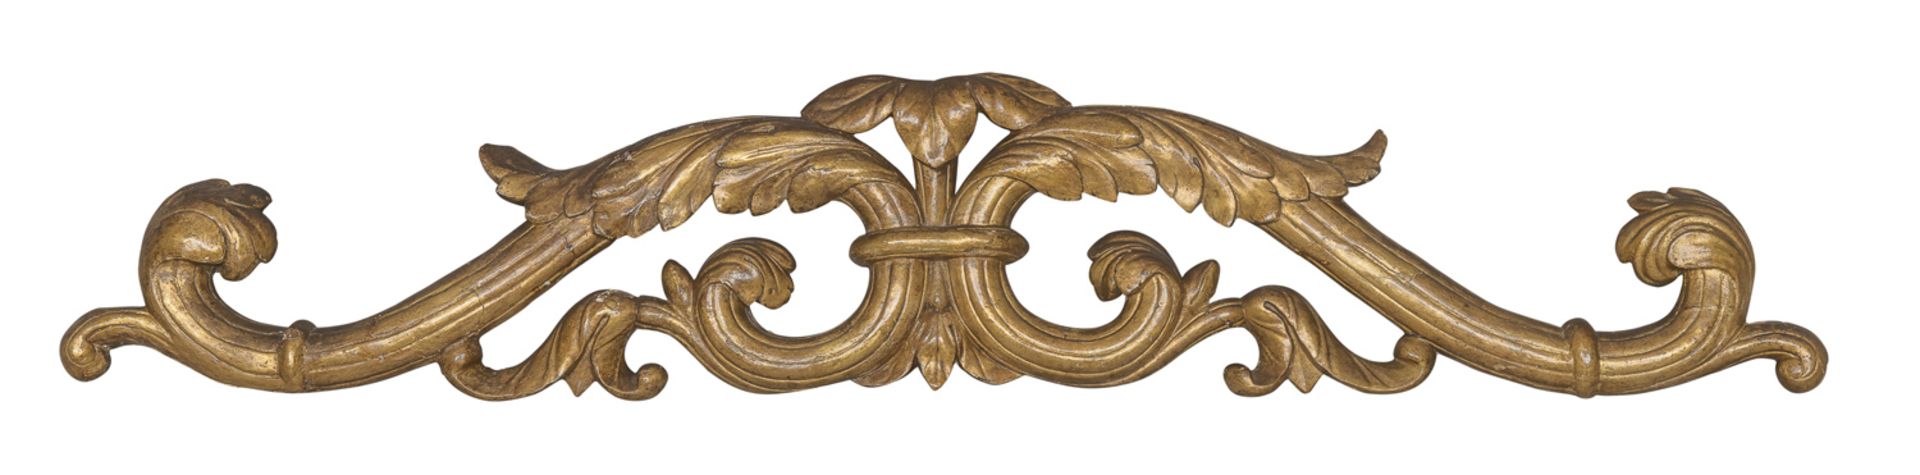 FRIEZE IN GILTWOOD 18TH CENTURY